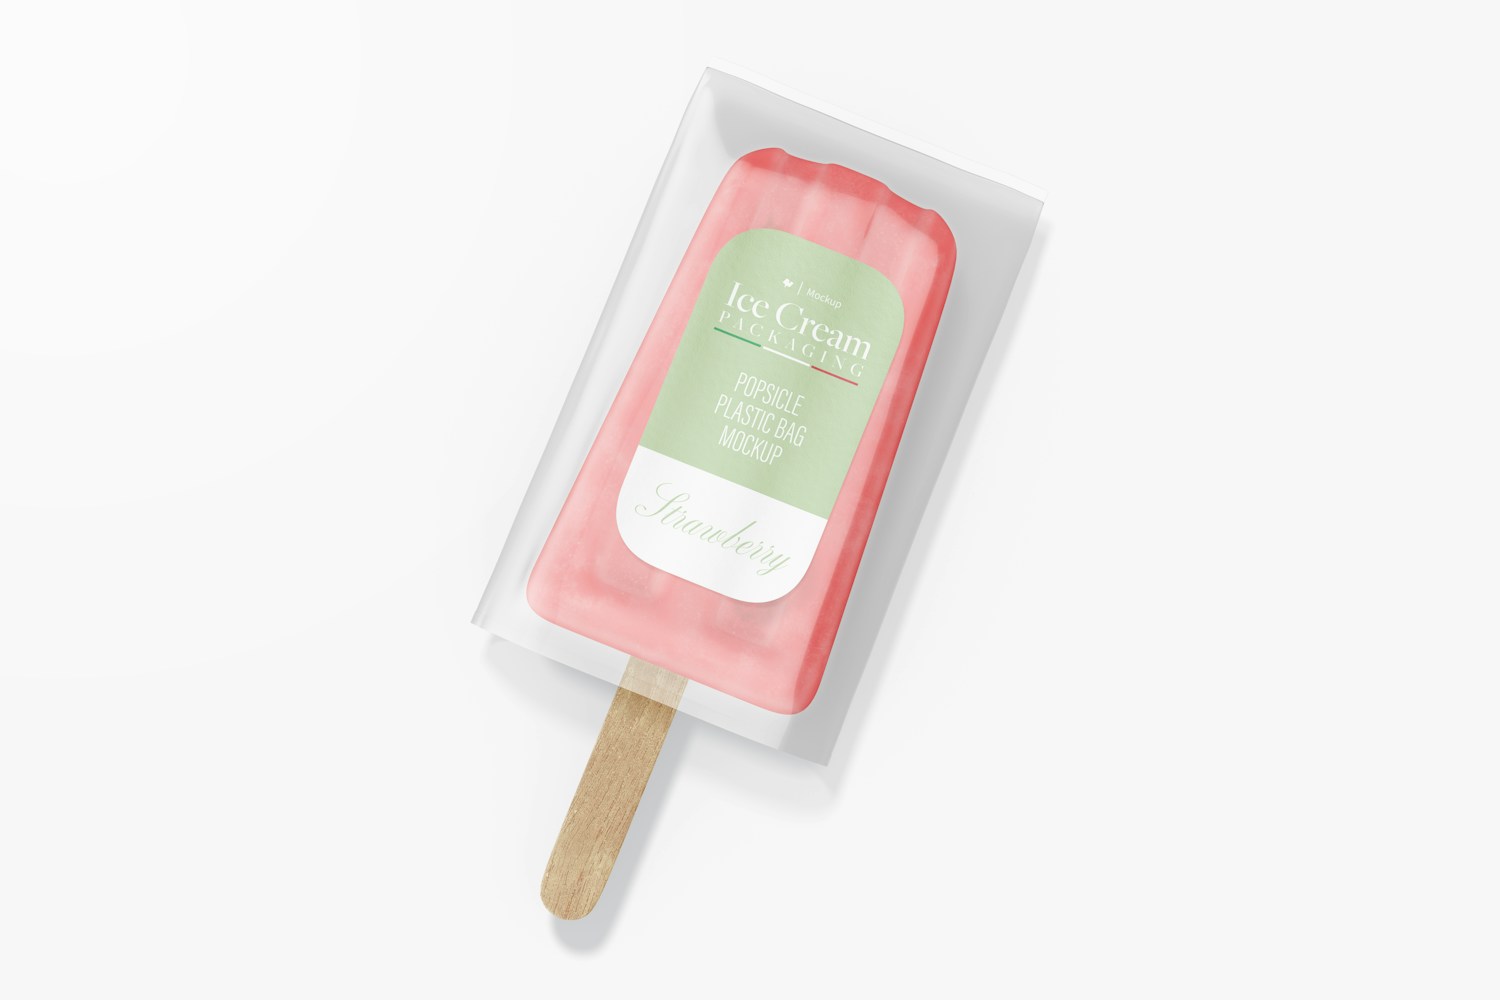 Popsicle Plastic Bag with Tag Mockup, Top View